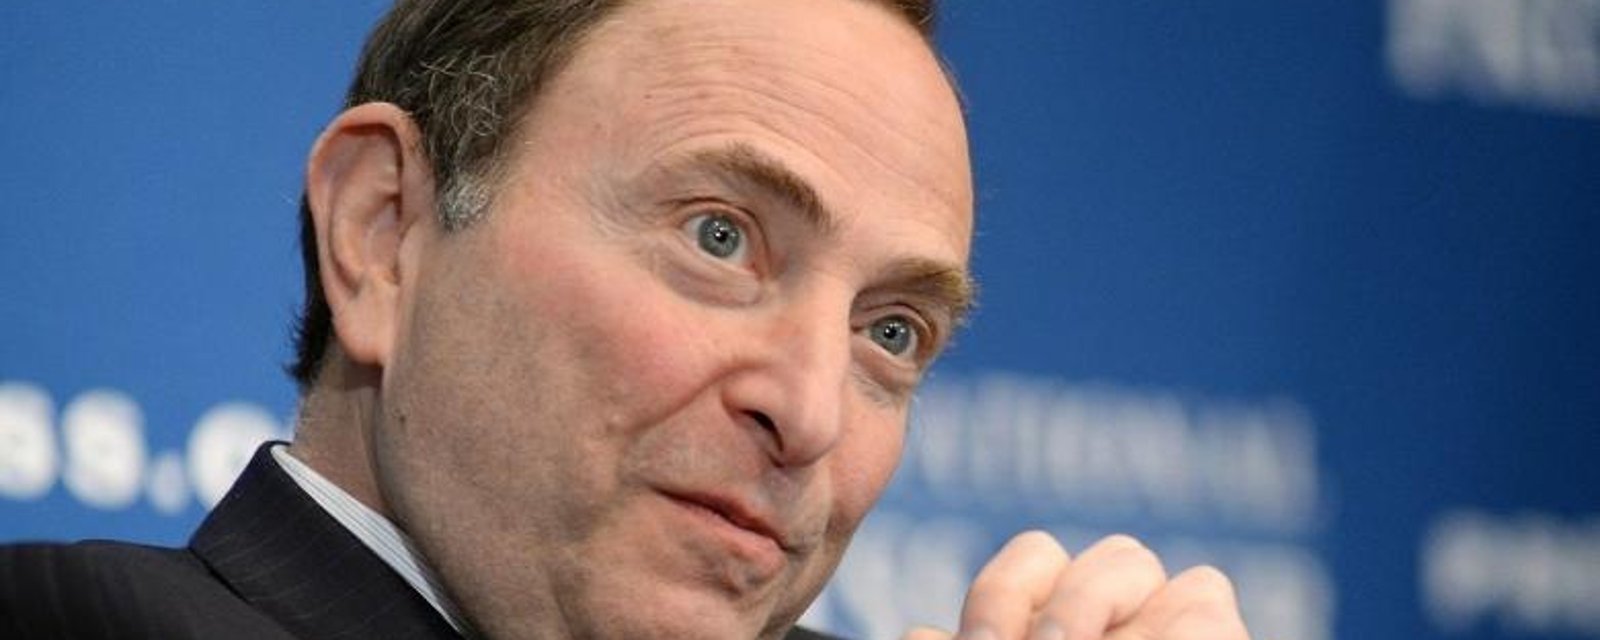 Statement from Bettman could spark battle with Russian Federation.